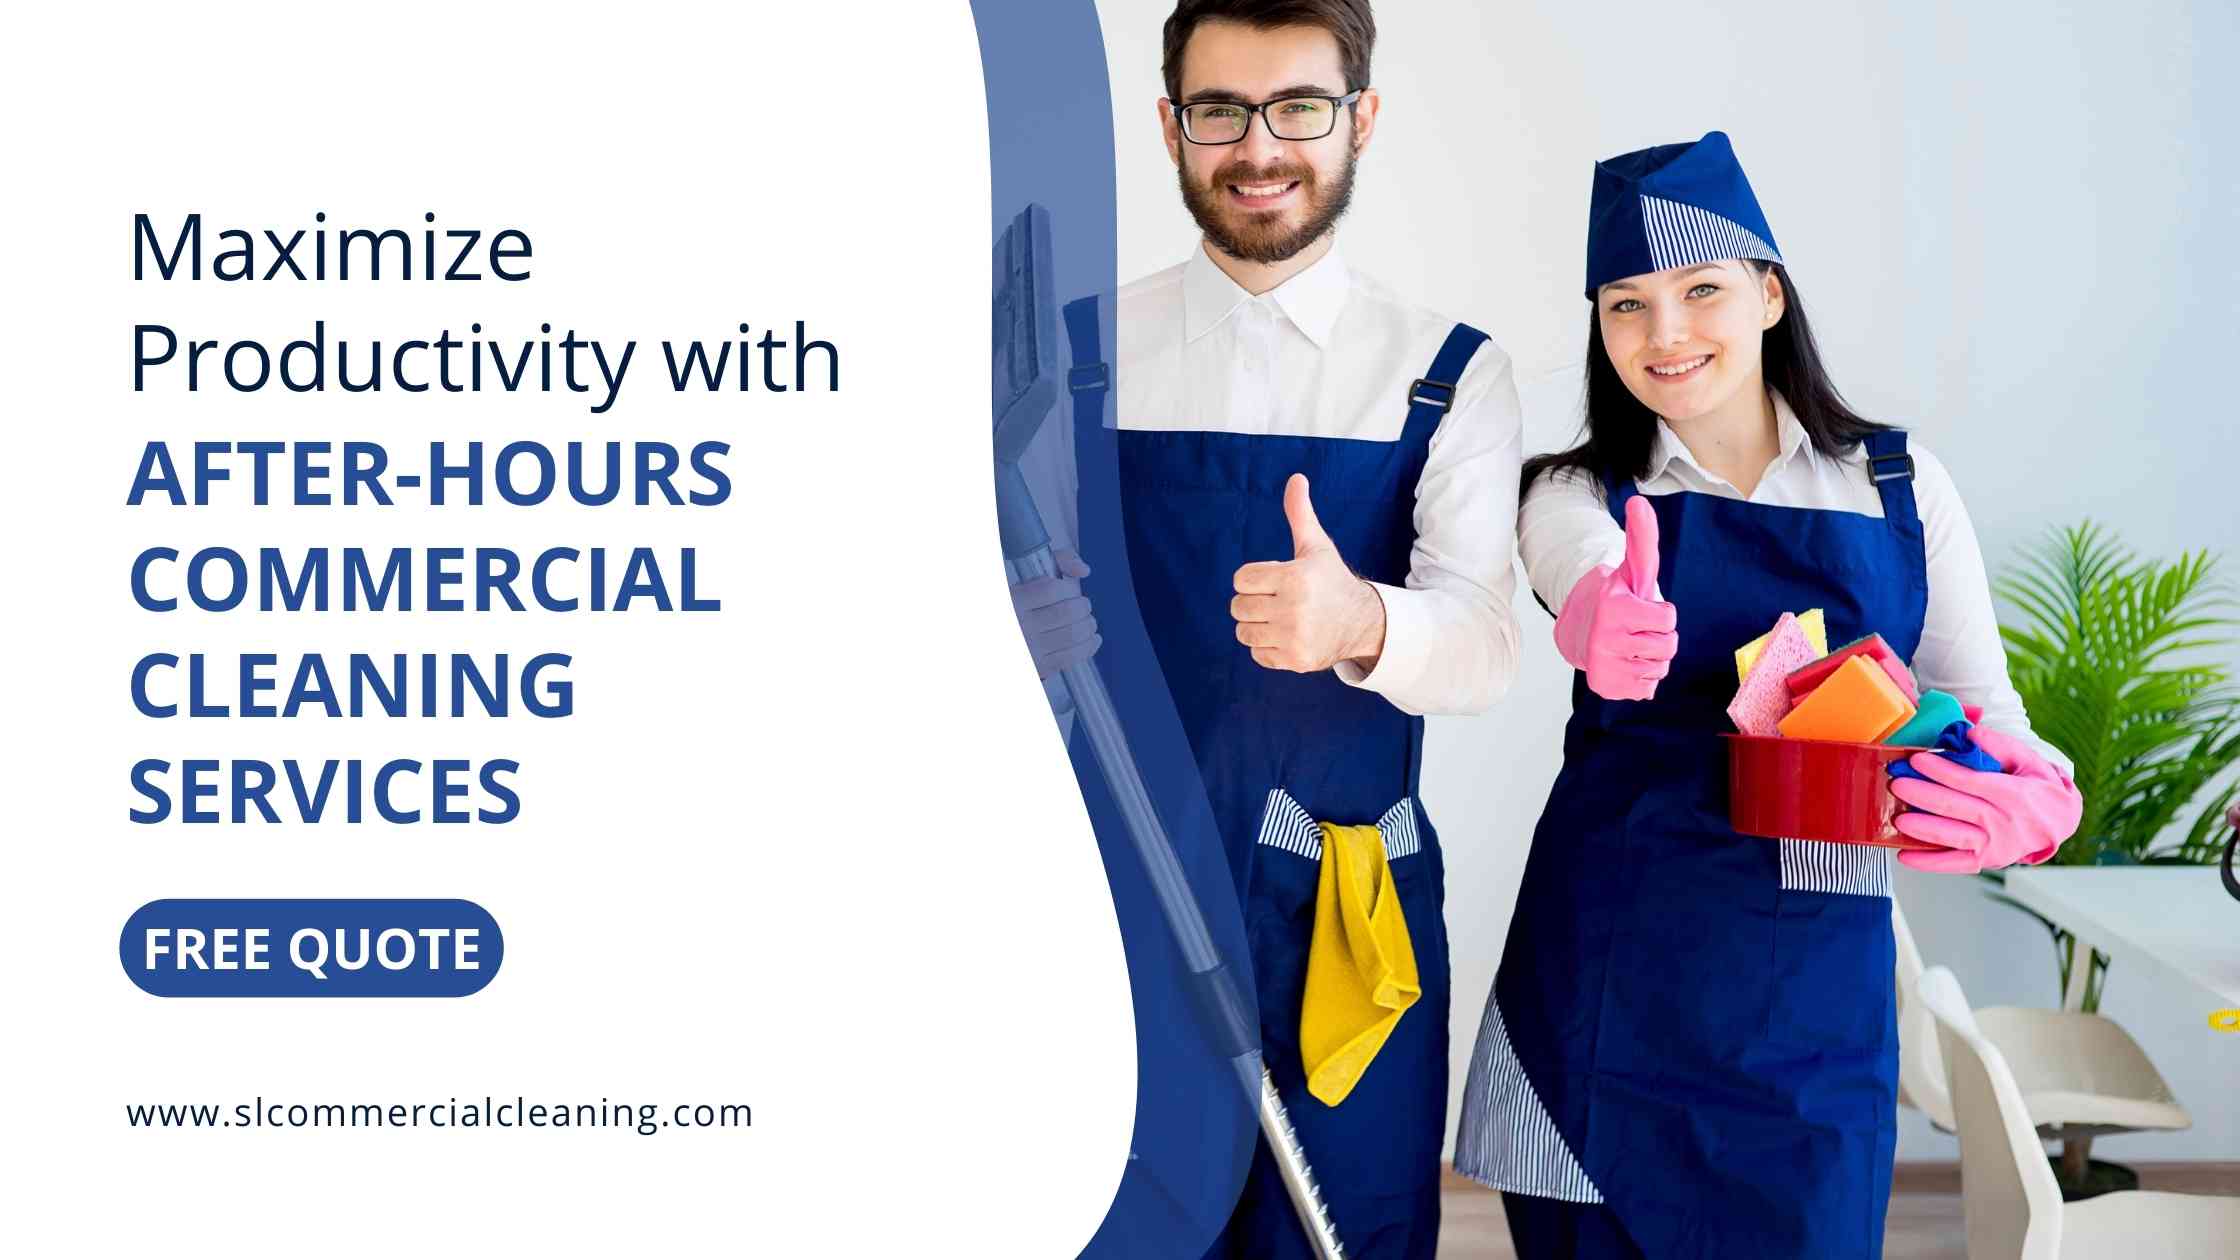 After-hours commercial cleaning services